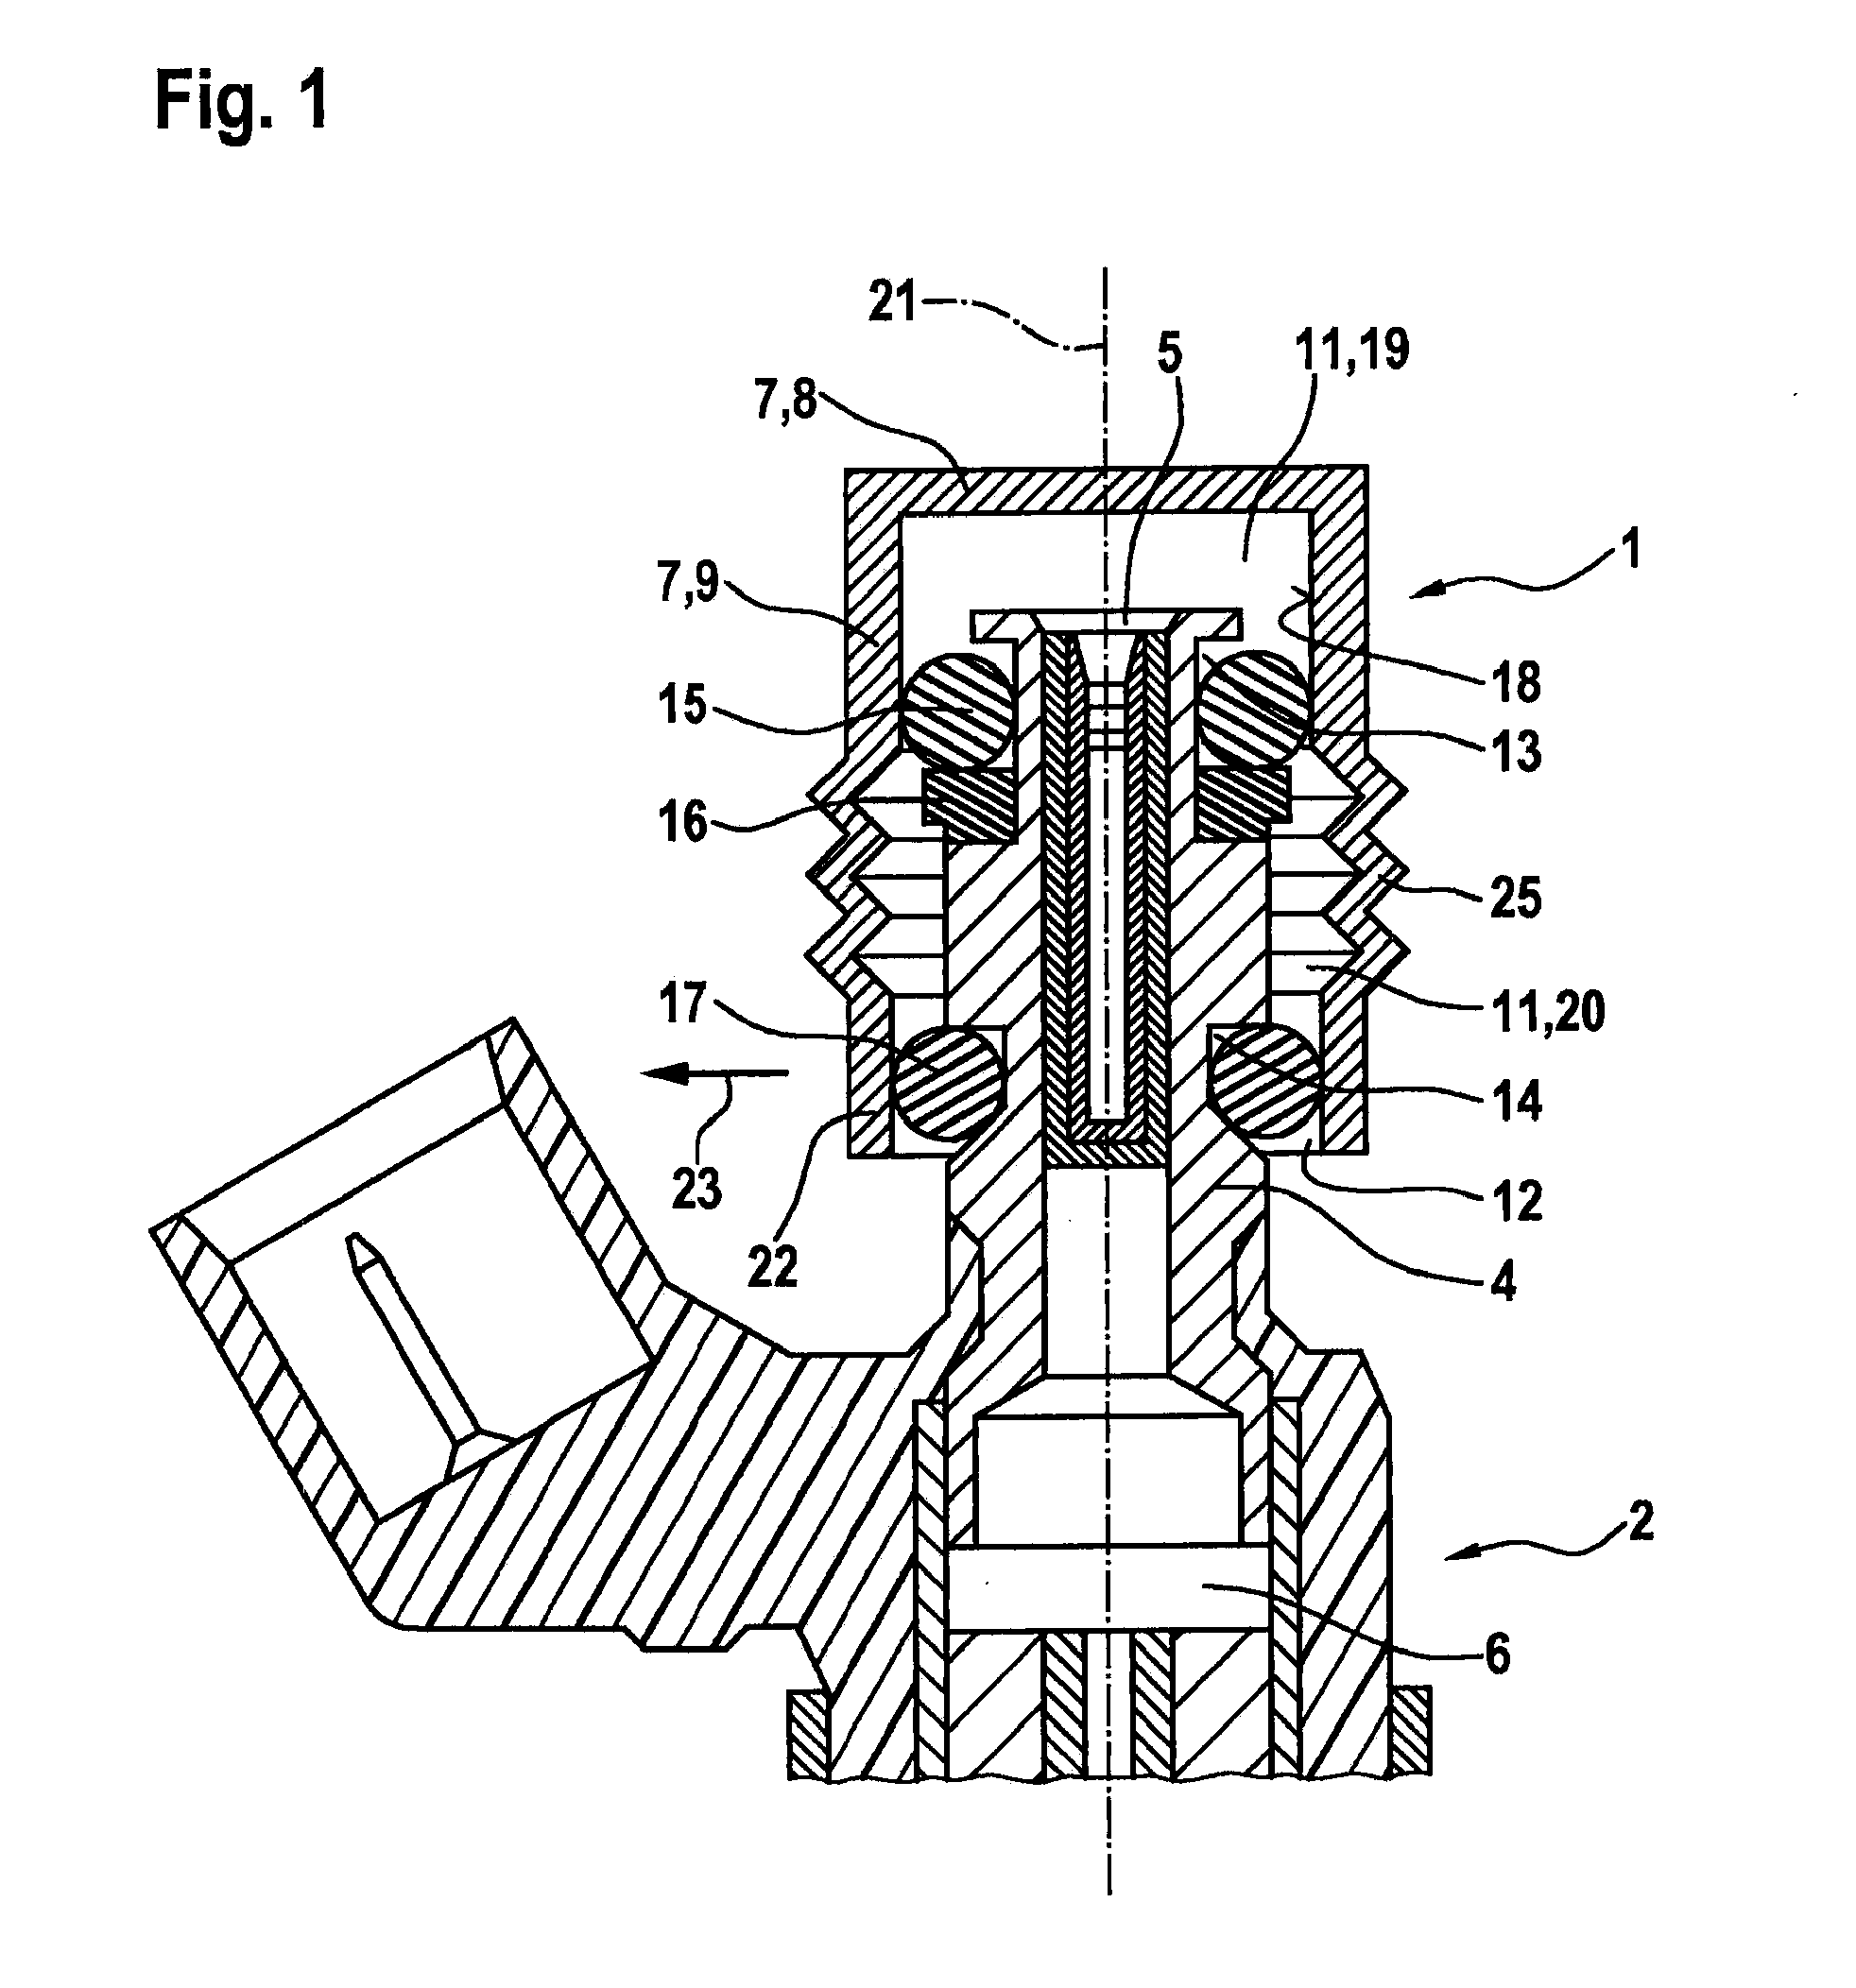 Fuel injection system including a fuel-guiding component, a fuel injector, and a connecting element